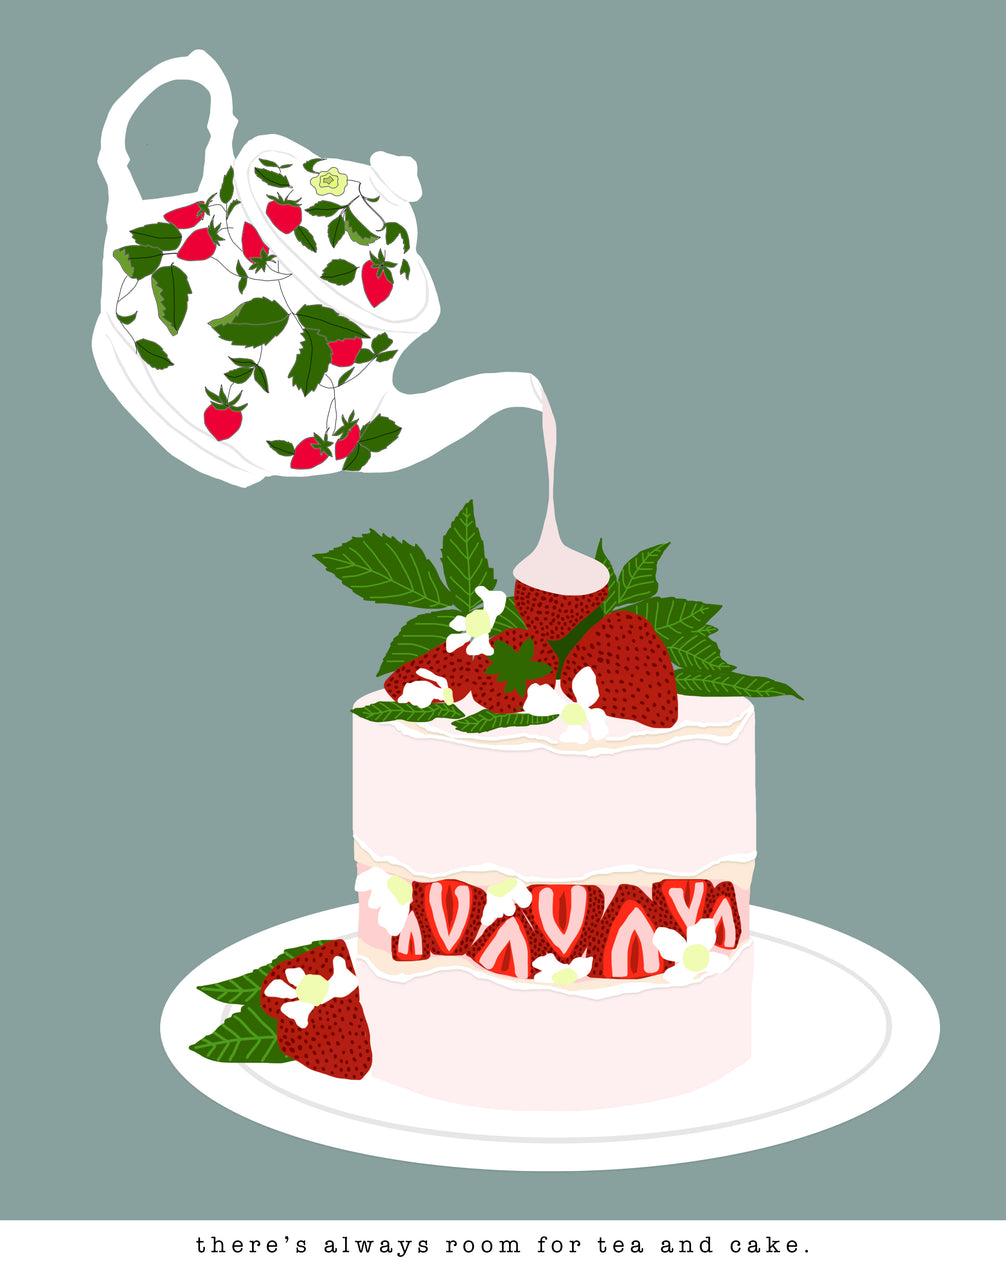 There's Always Room for Tea and Cake (Greeting Card)